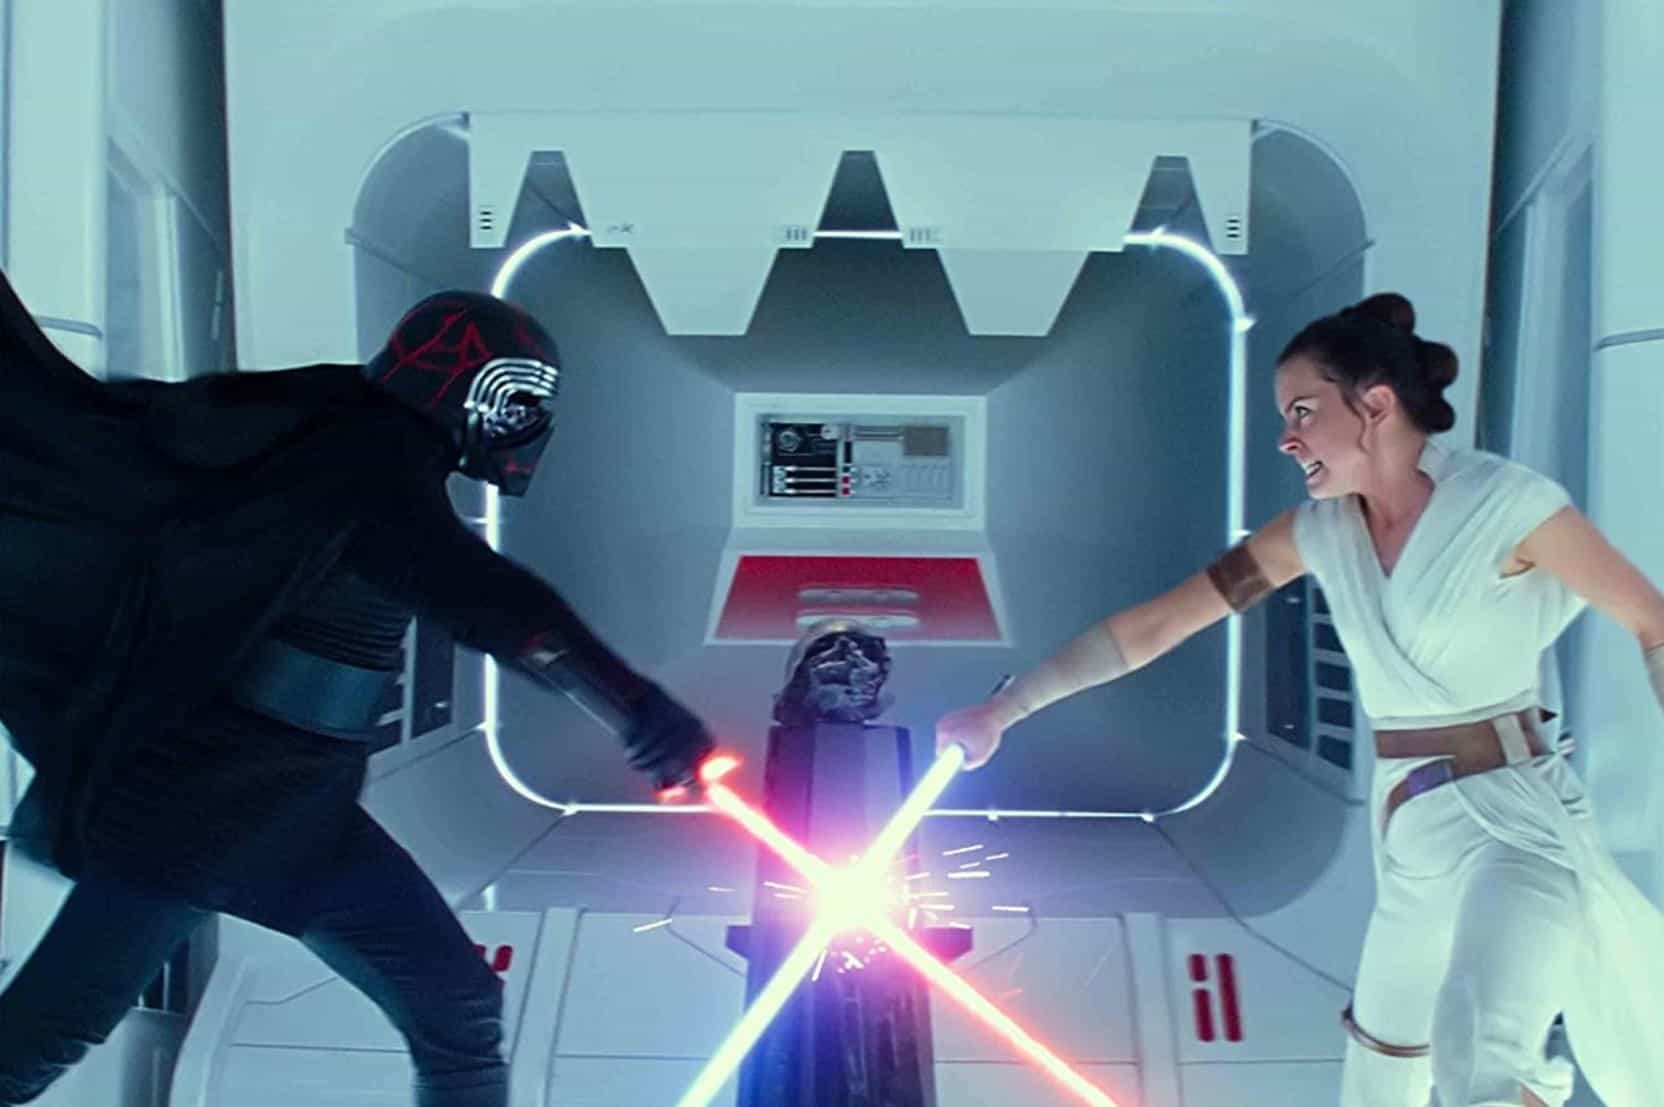 A man and woman fight with lightsabers in this image from Disney Plus 